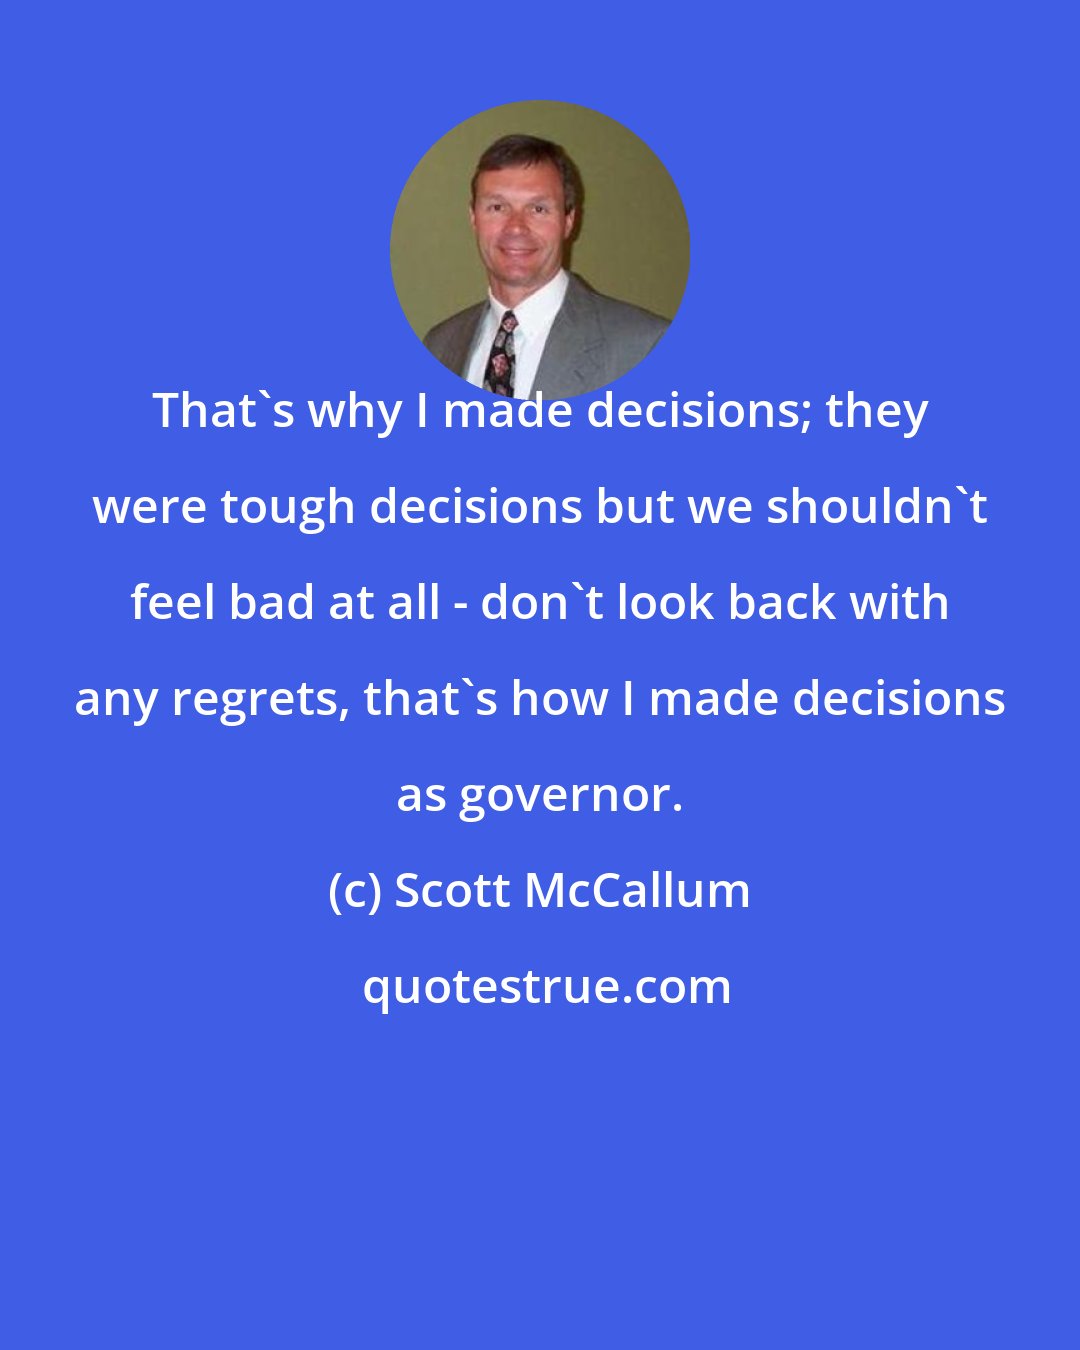 Scott McCallum: That's why I made decisions; they were tough decisions but we shouldn't feel bad at all - don't look back with any regrets, that's how I made decisions as governor.